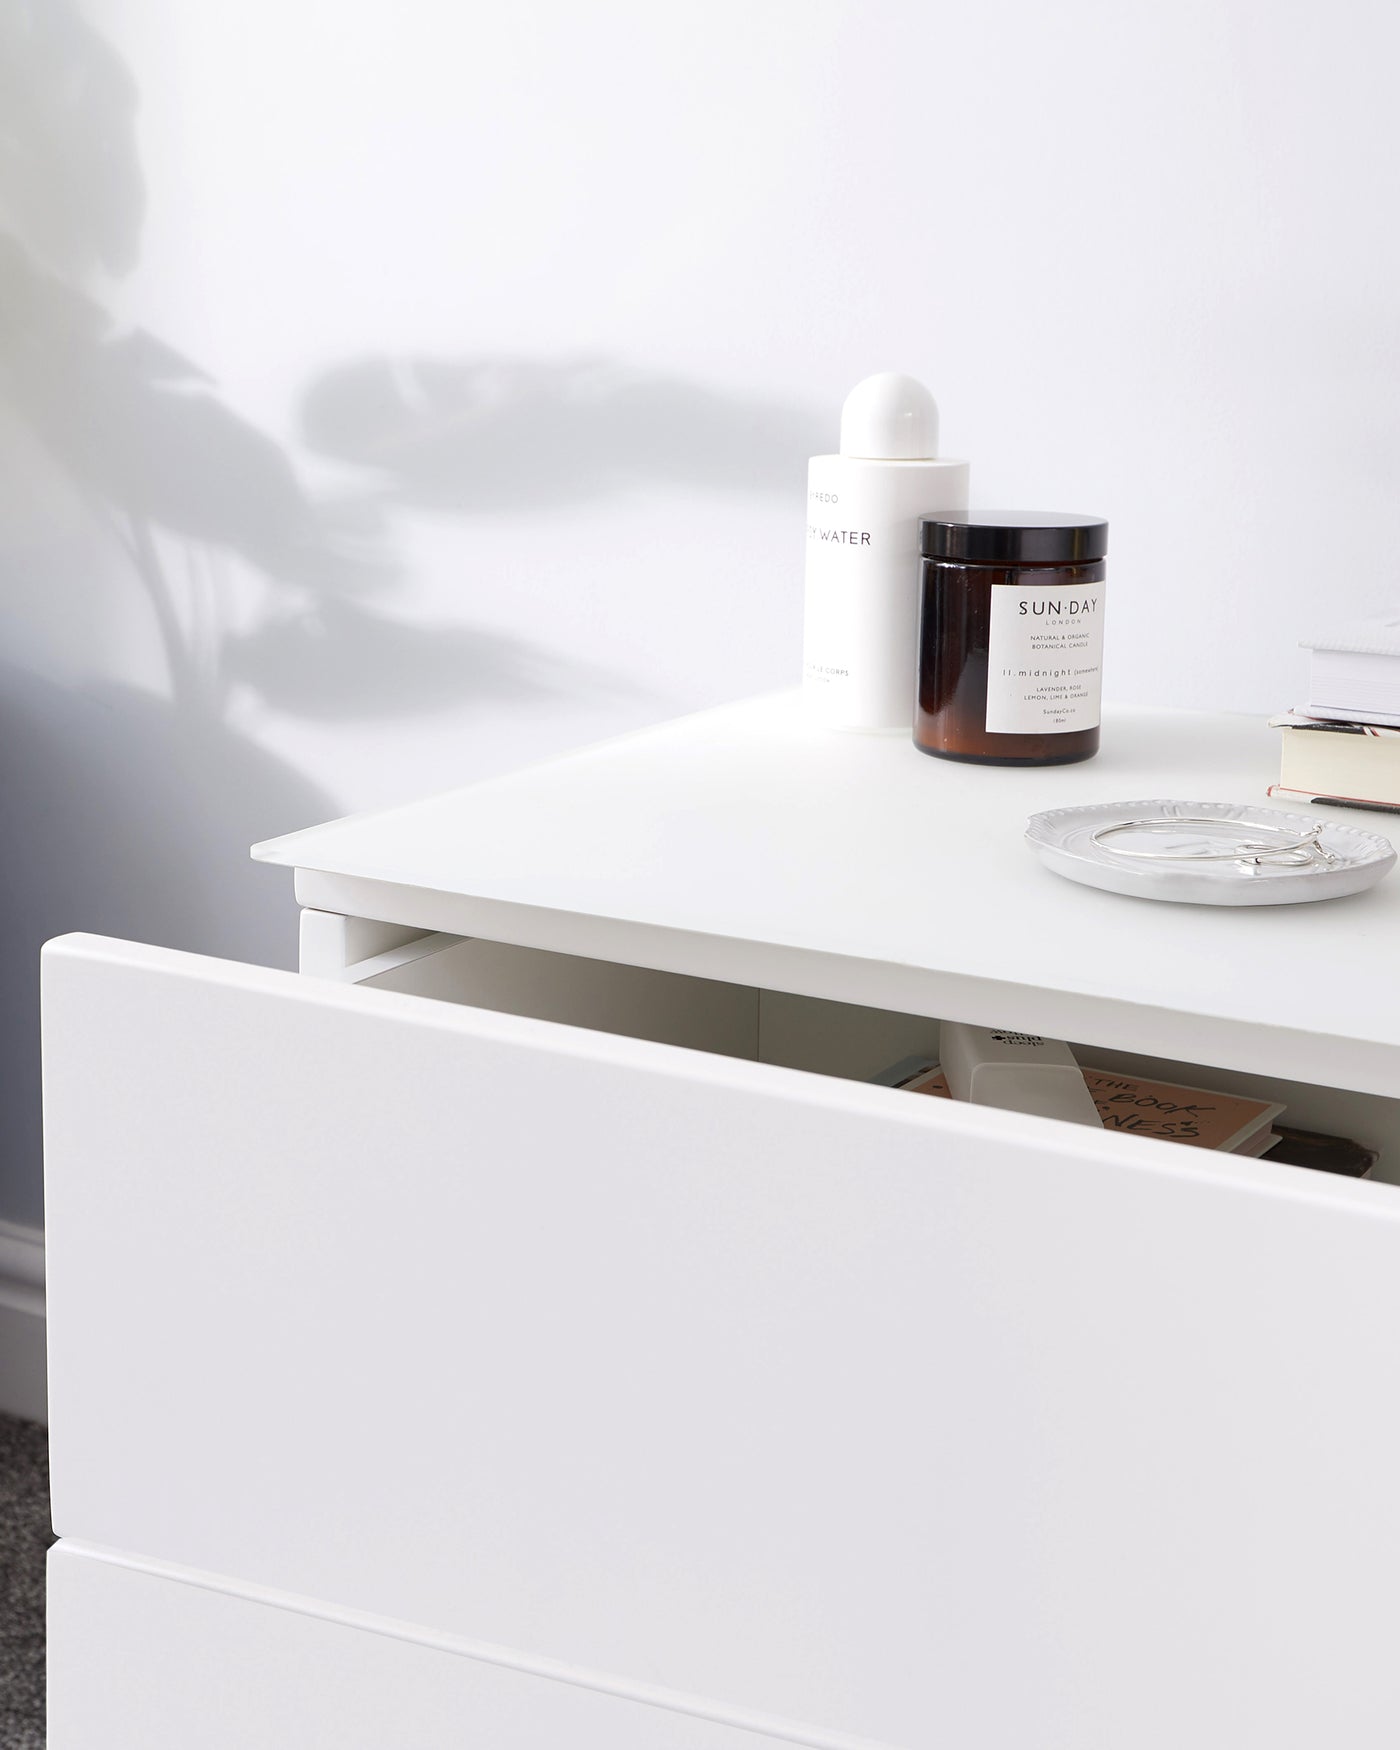 A modern white minimalist dresser with clean lines featuring flat-panel drawers that are partially open, showing stored items like books and miscellaneous objects. On top of the dresser sits two cosmetic bottles and a small ornamental dish. The simple design emphasizes functionality and contemporary elegance.